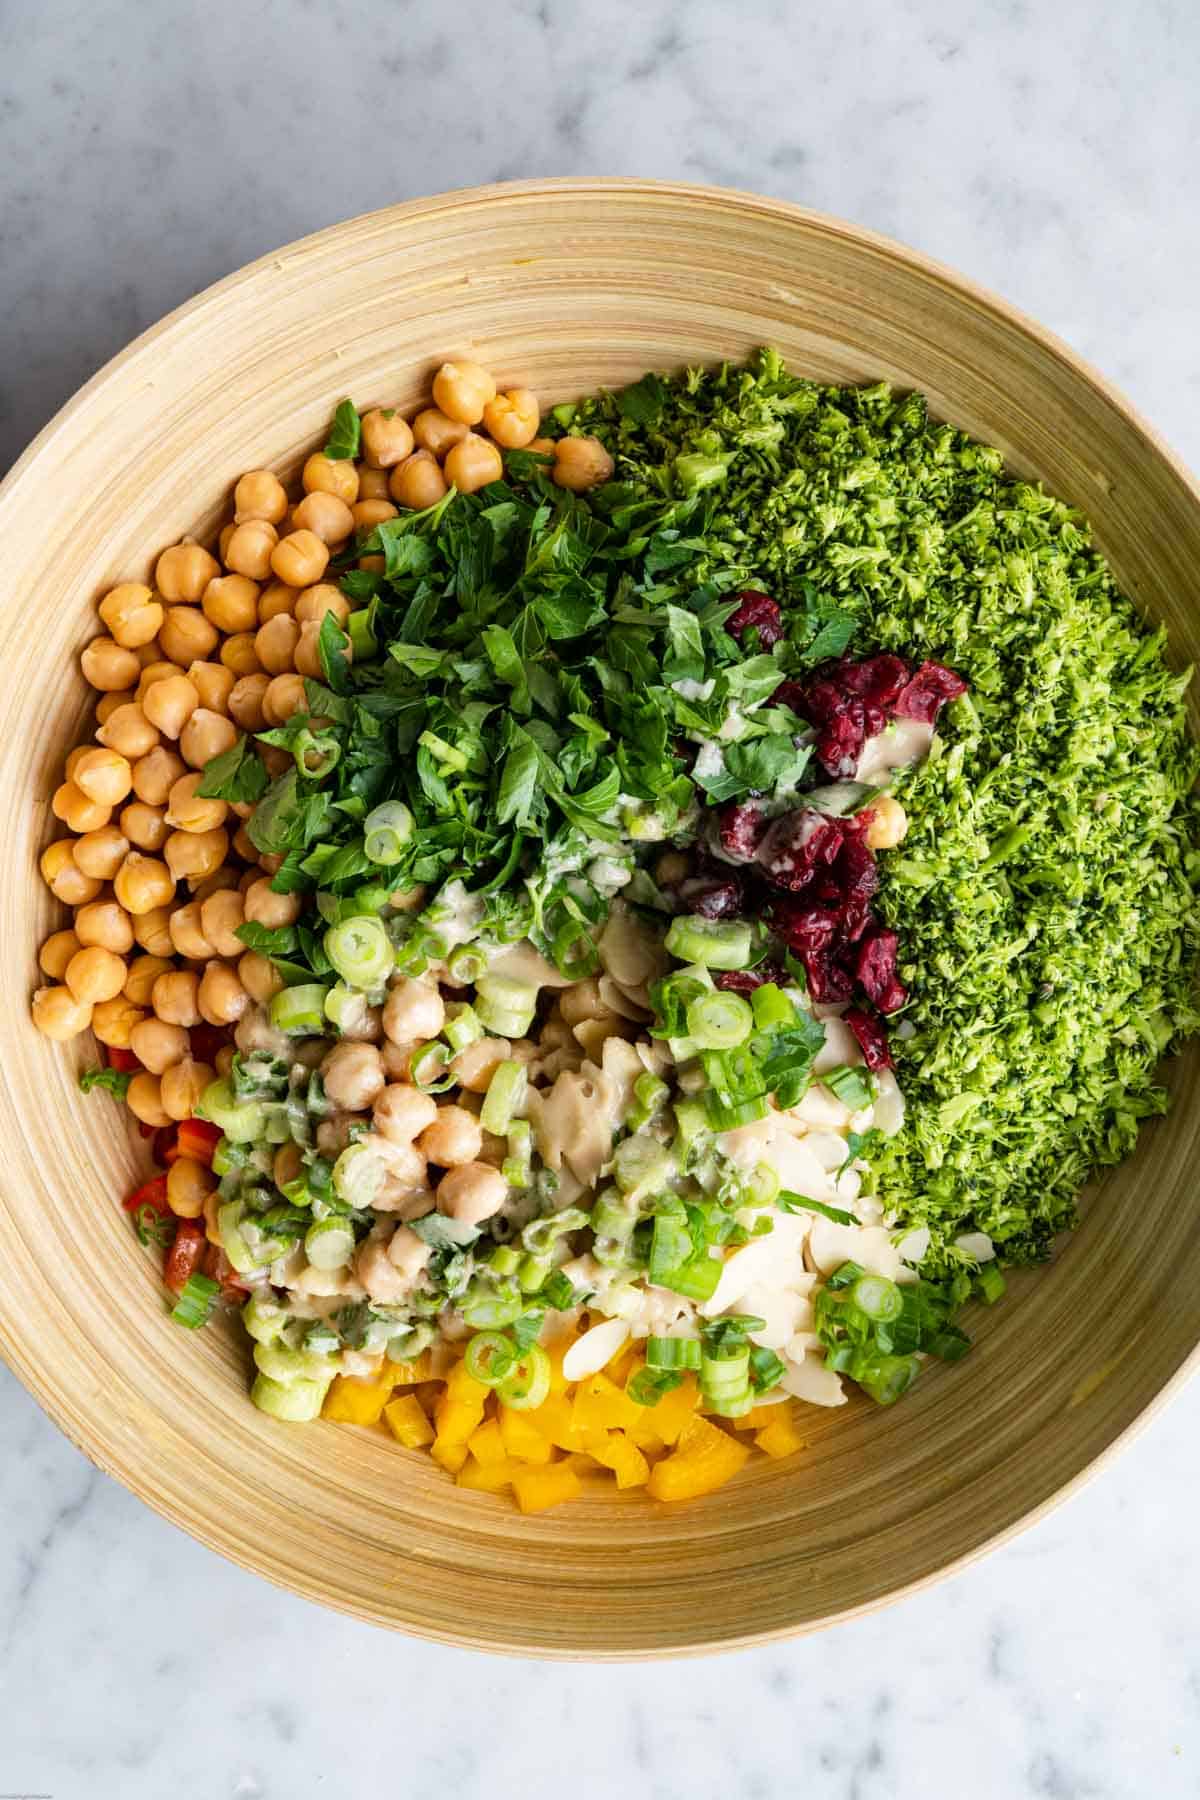 Riced broccoli, chickpeas, diced red and yellow bell pepper, sliced green onion, chopped parsley and mint, sliced almonds, and oil-free tahini dressing in a large wooden bowl.